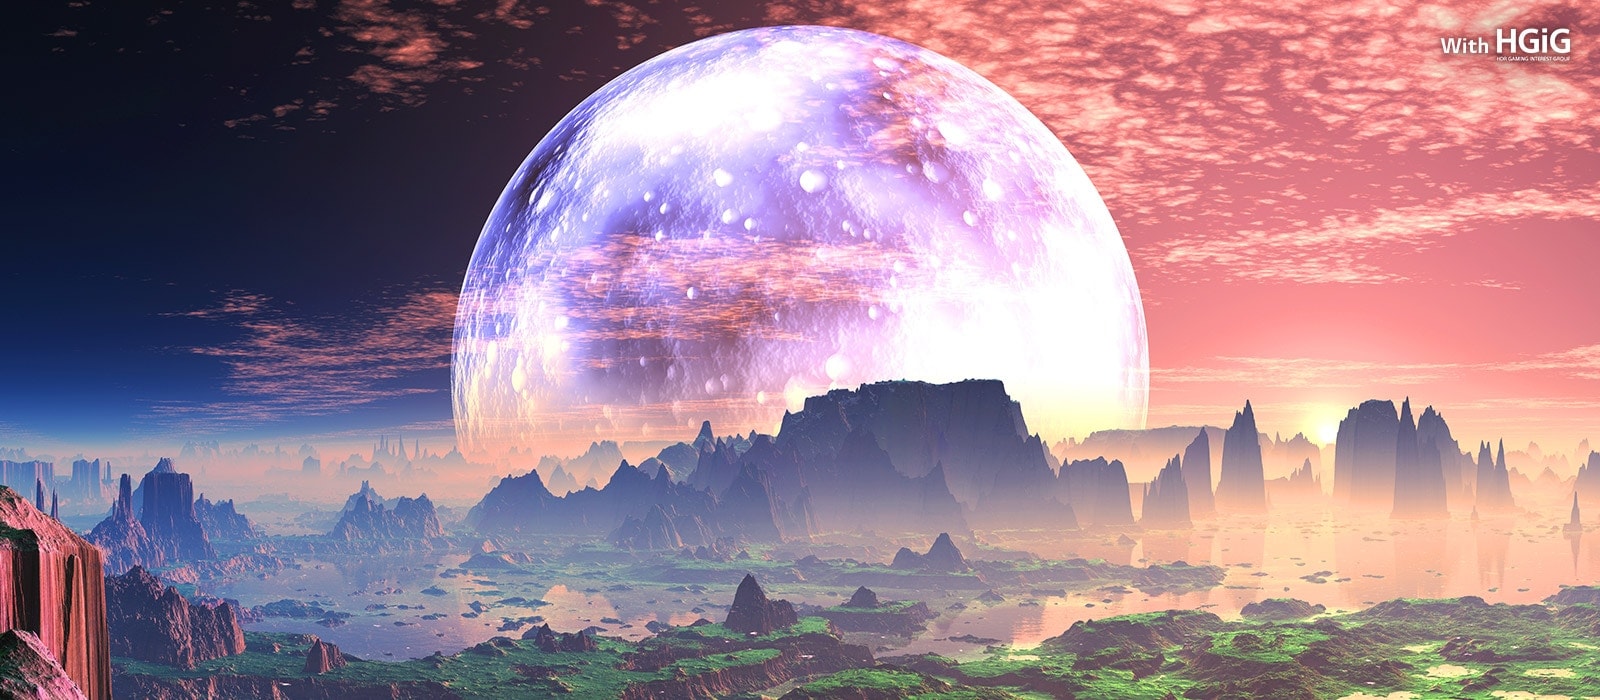 A scene of a dawn on Idyllic Earth-like Planet is divided into two part – on left is a more dull and less bright and the text says without HGiG on left top corner. On right is a brighter scene and the text says with HGiG on right top corner.